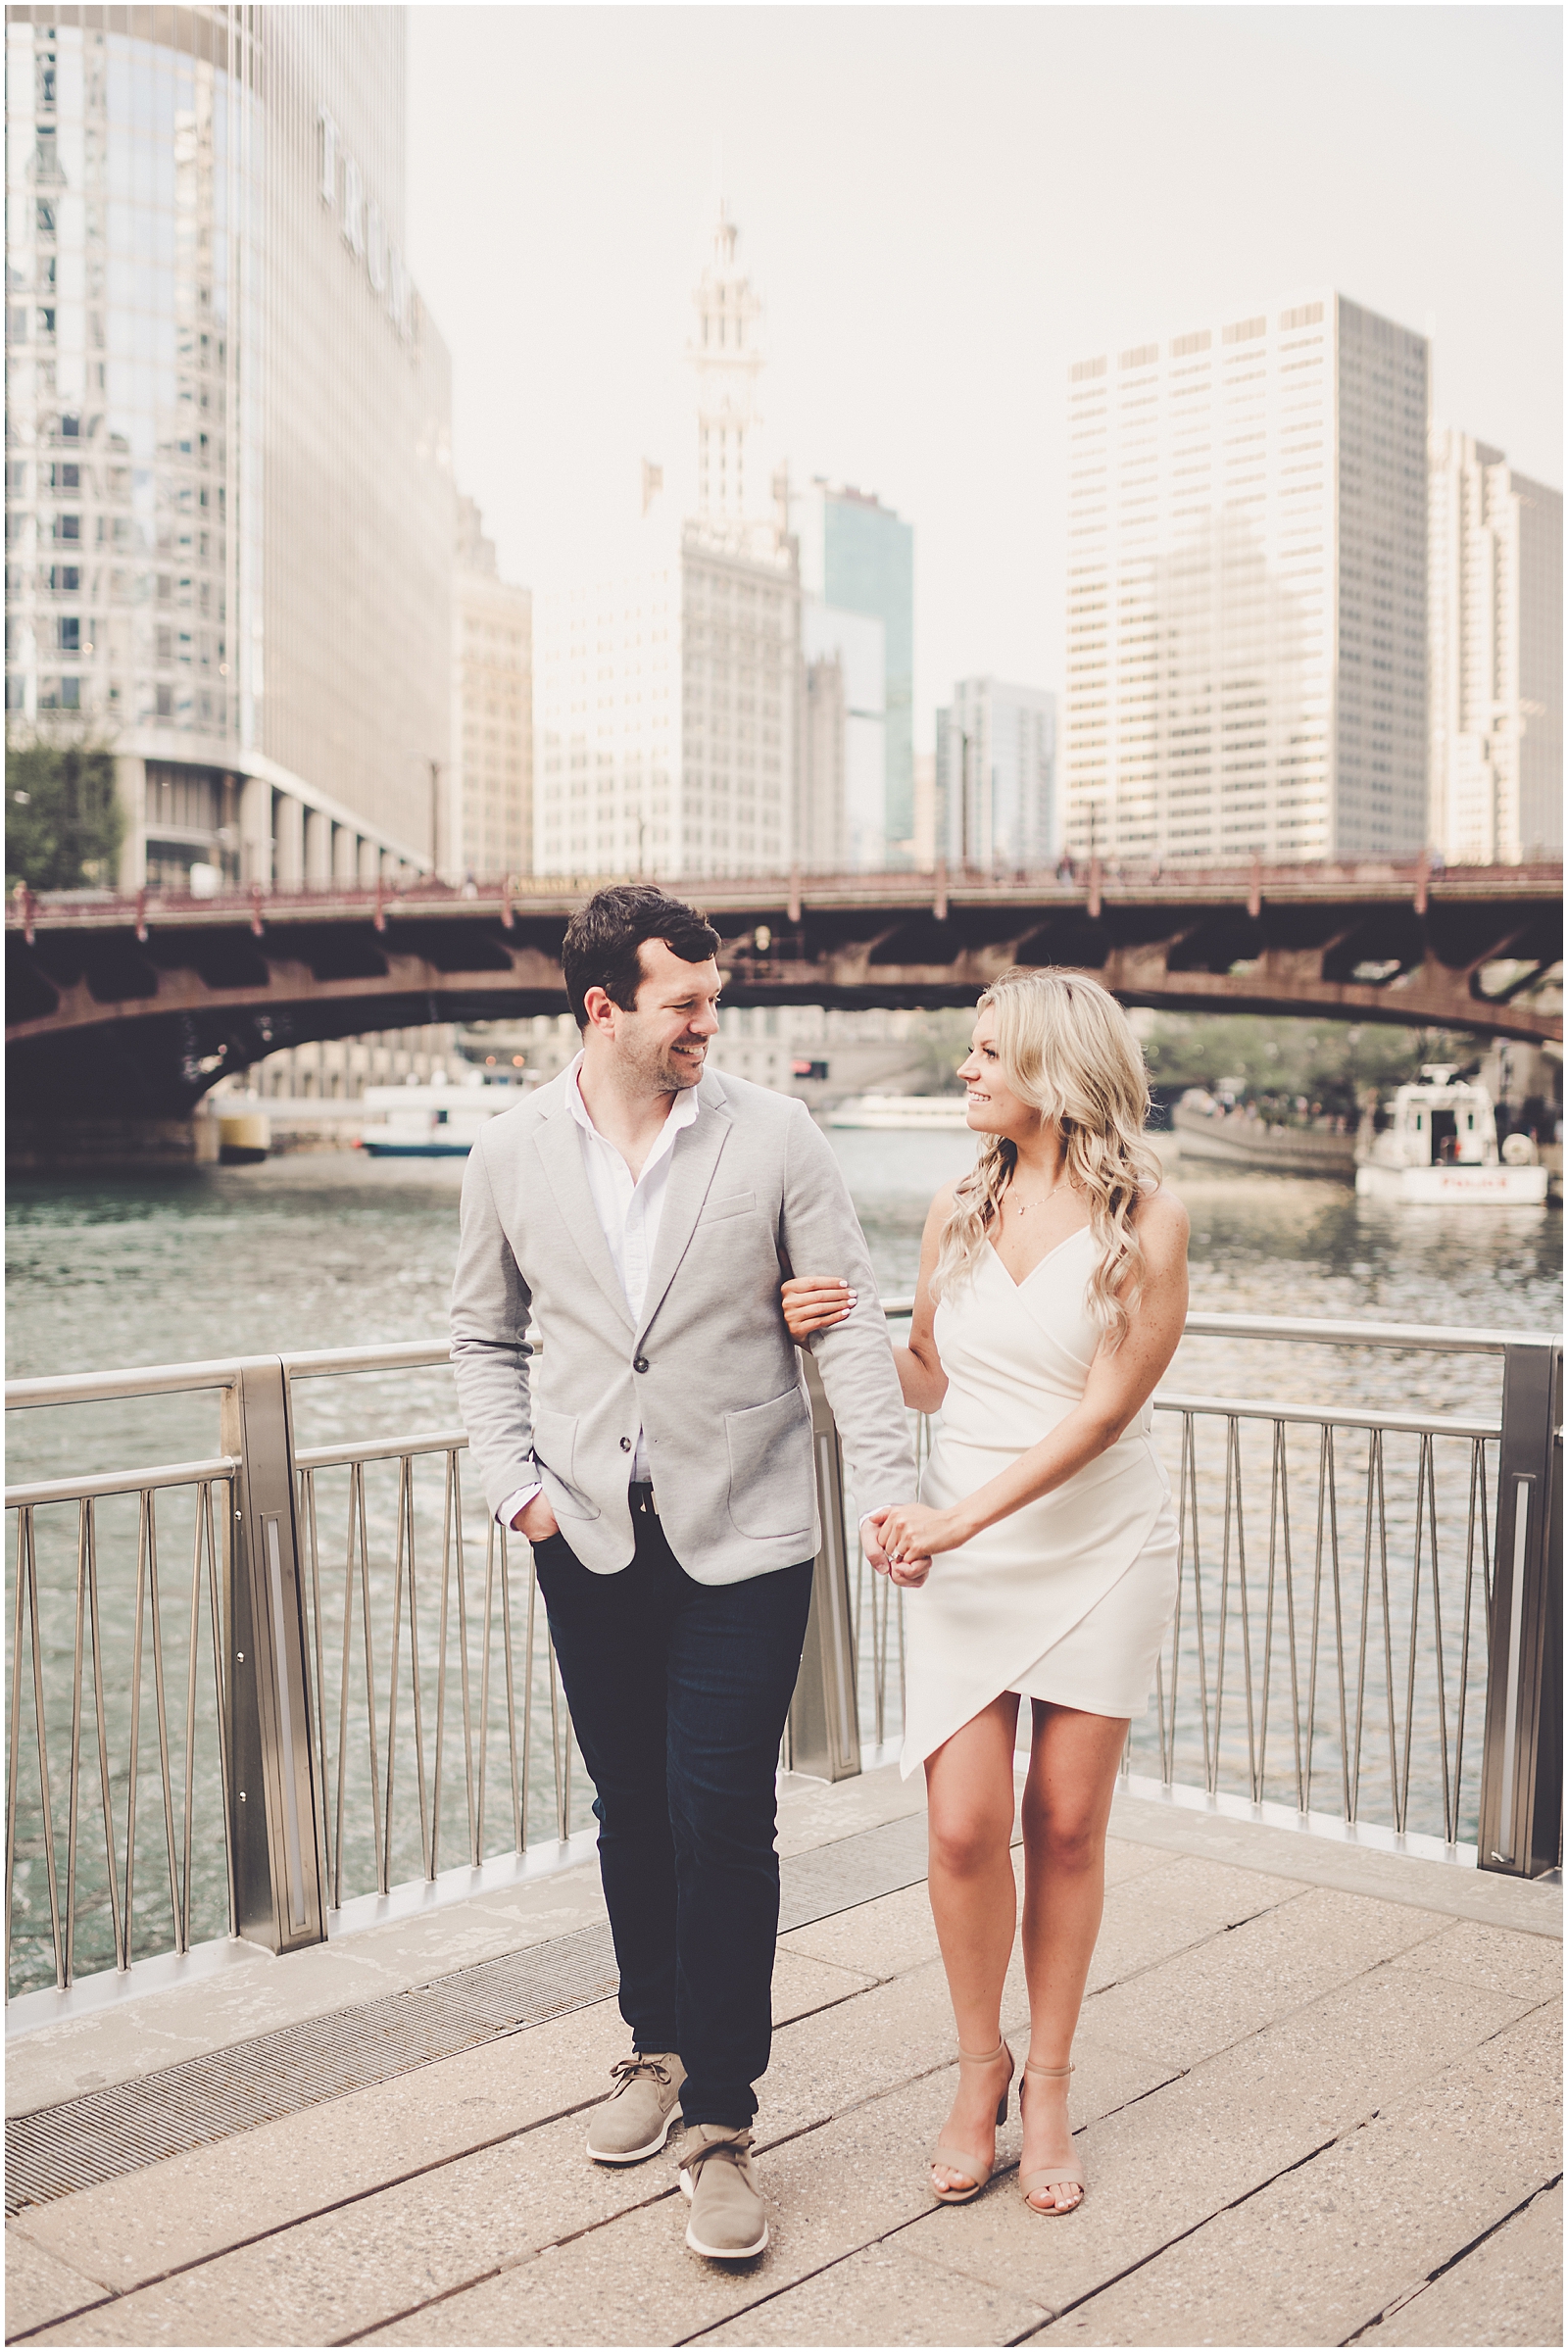 Shelby & Tim's riverwalk and Milton Lee Olive Park engagement photos in Chicago with Chicago wedding photographer Kara Evans Photographer.